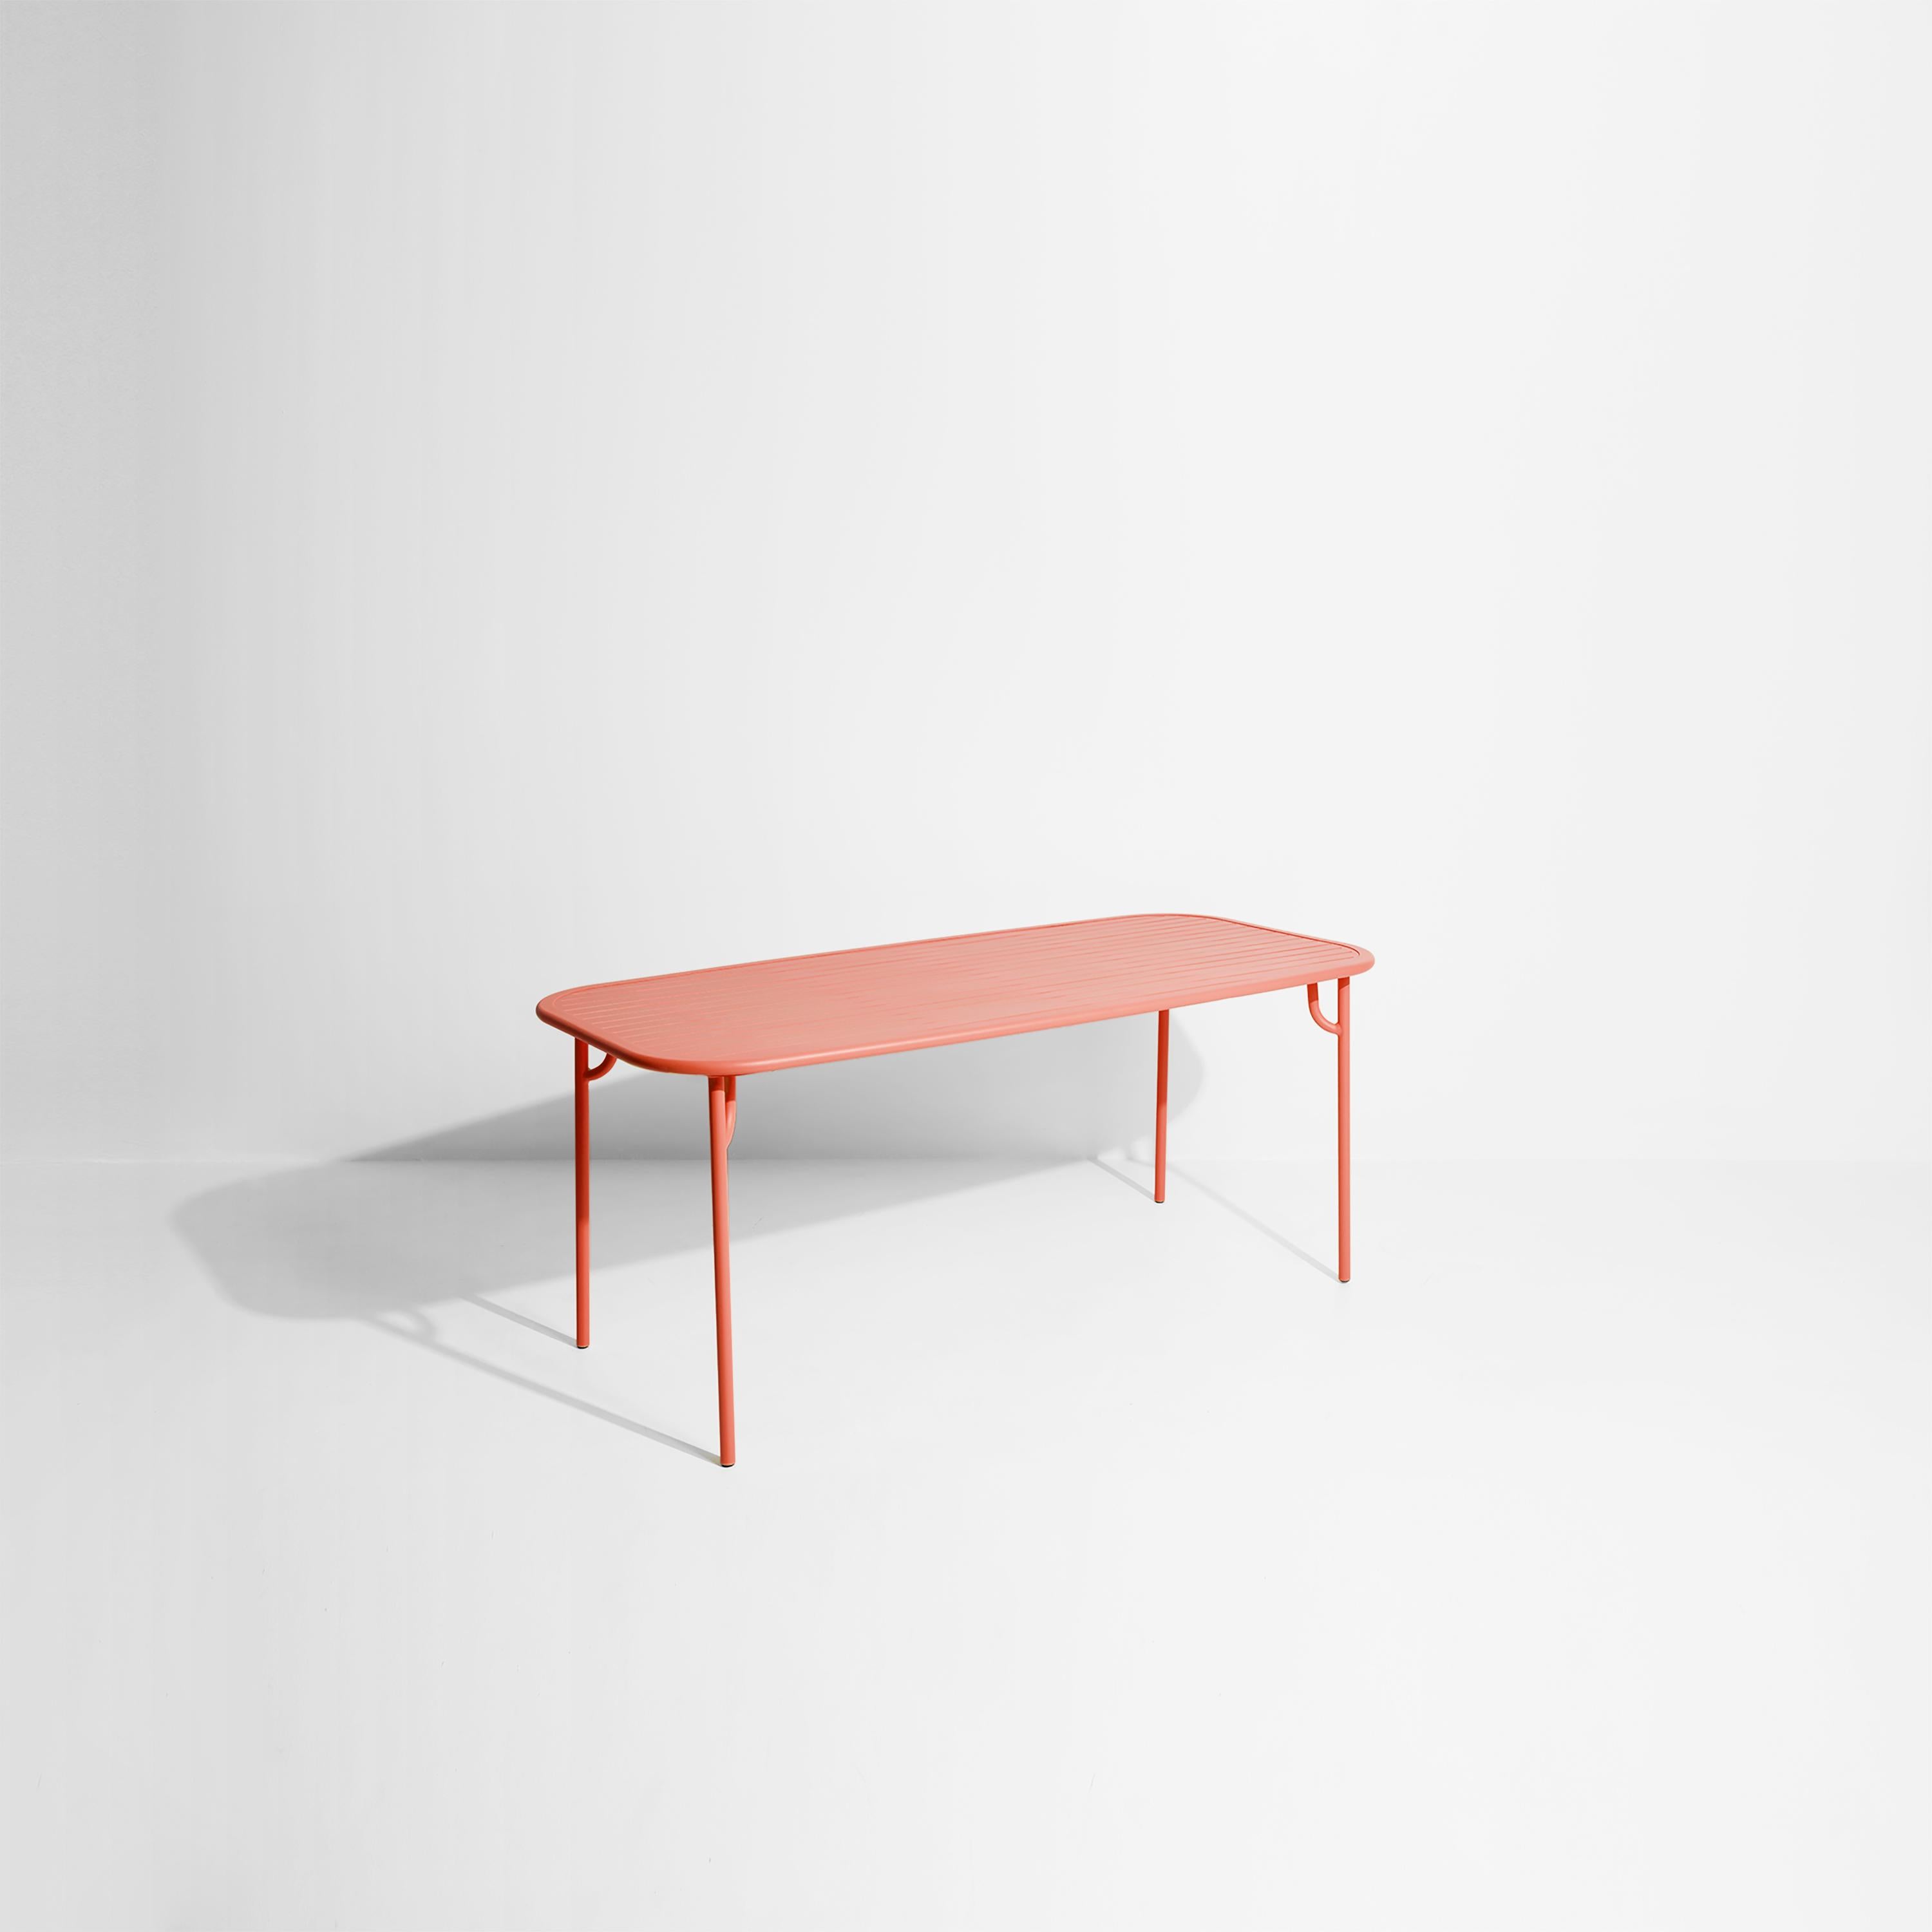 Petite Friture Week-End Medium Rectangular Dining Table in Coral Aluminium with Slats by Studio BrichetZiegler, 2017

The week-end collection is a full range of outdoor furniture, in aluminium grained epoxy paint, matt finish, that includes 18